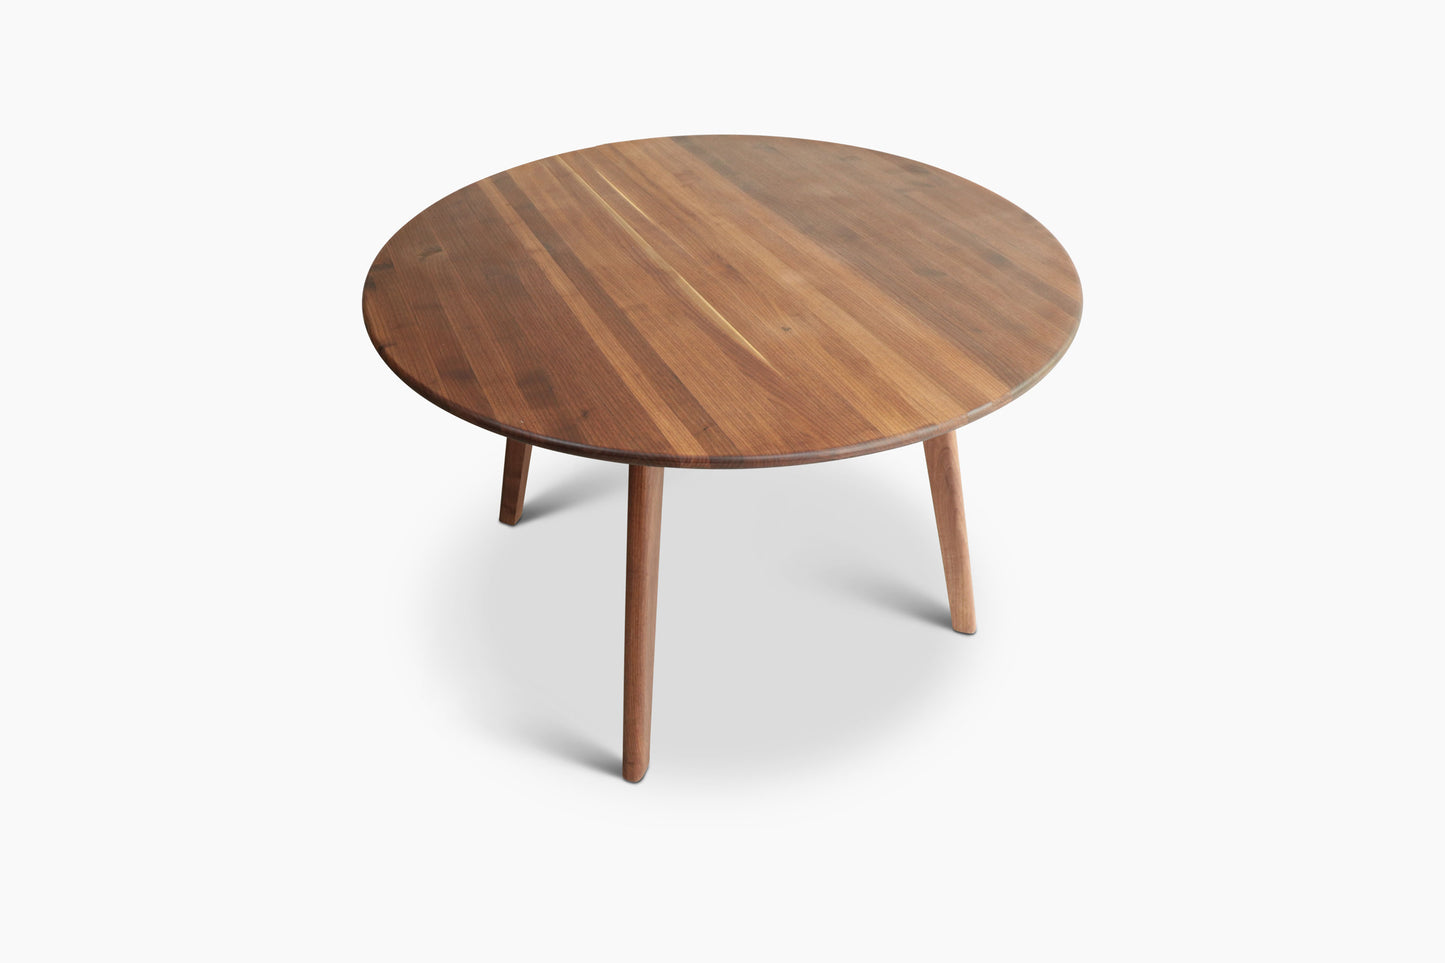 Norm Dining Table